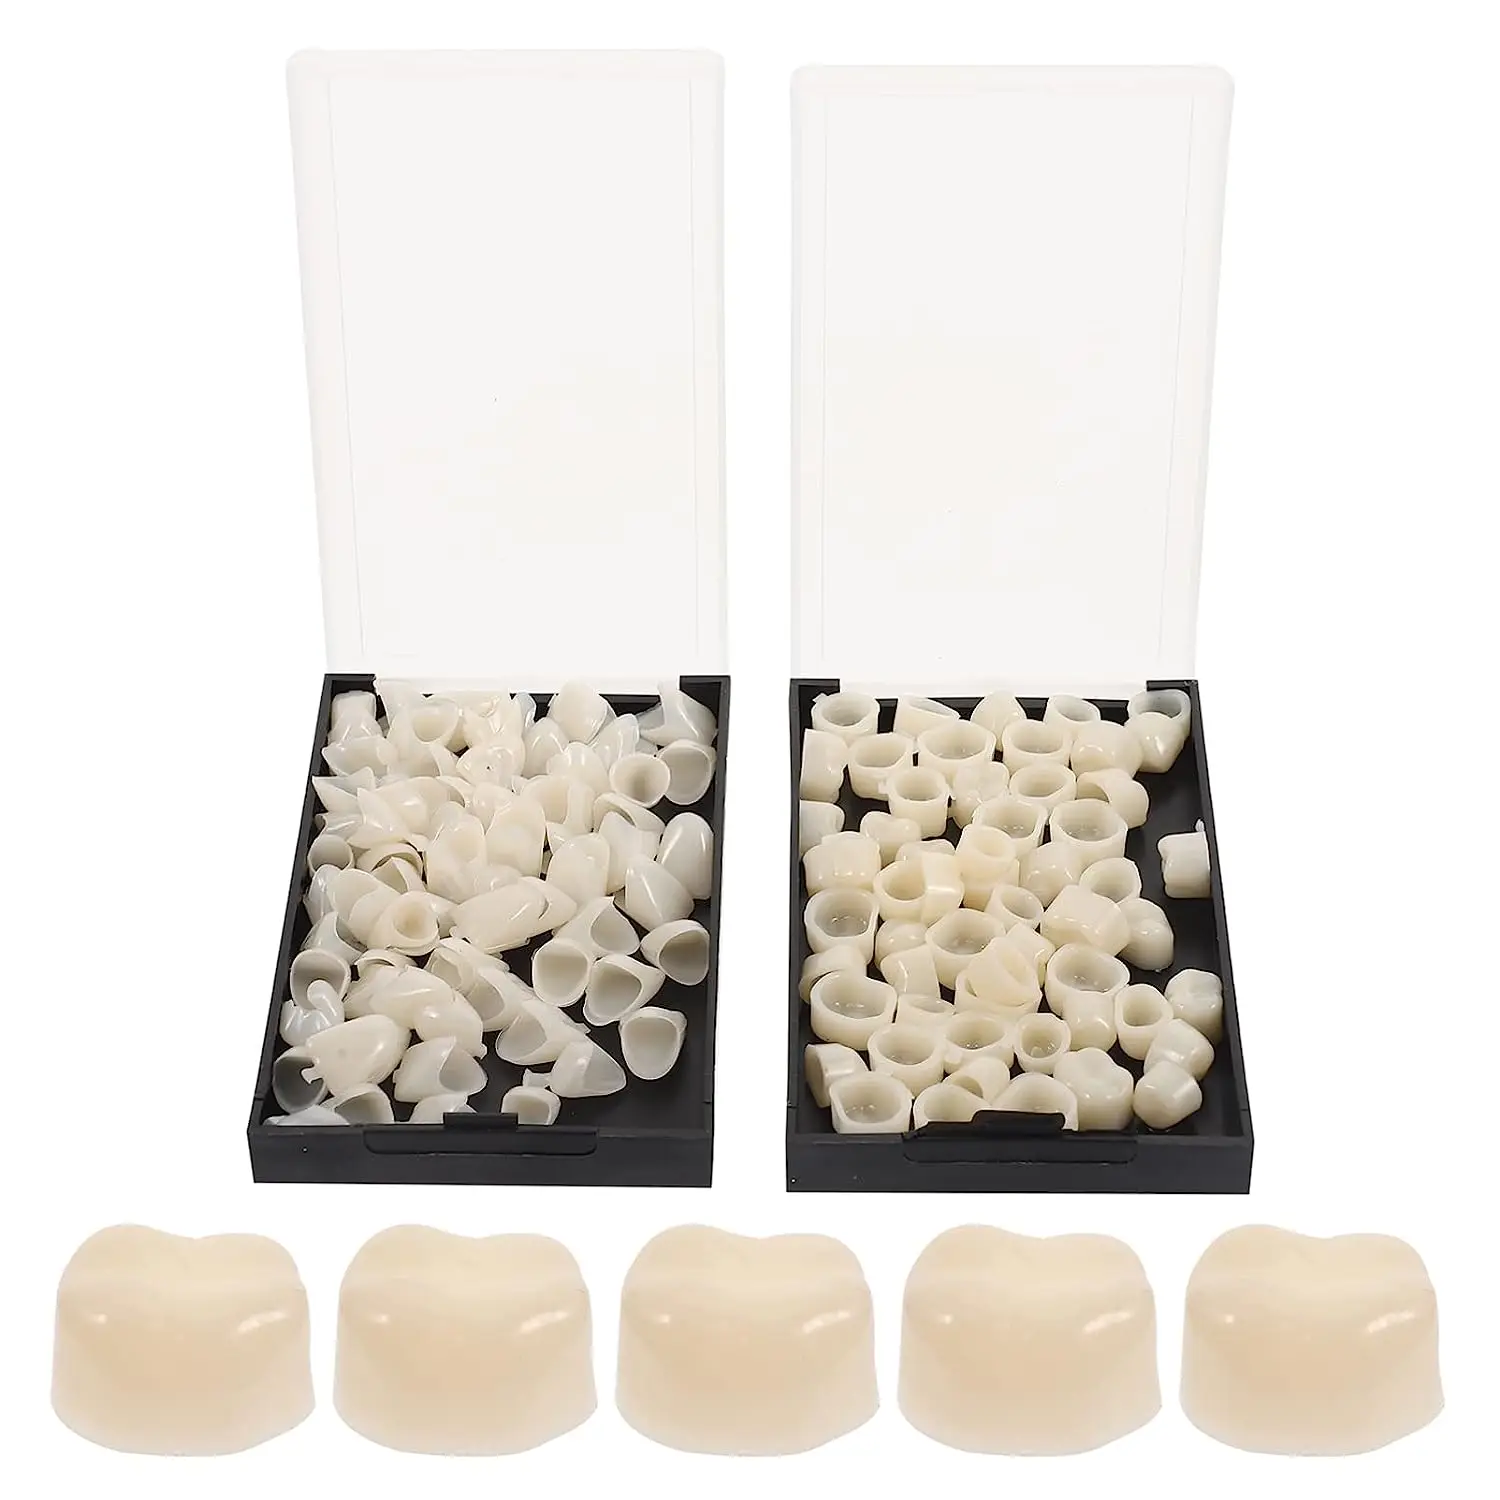 

1 Box Dental Temporary Crown Porcelain Anterior Posterior Crowns Resin Teeth For Dentist Tools Dentistry Lab Material